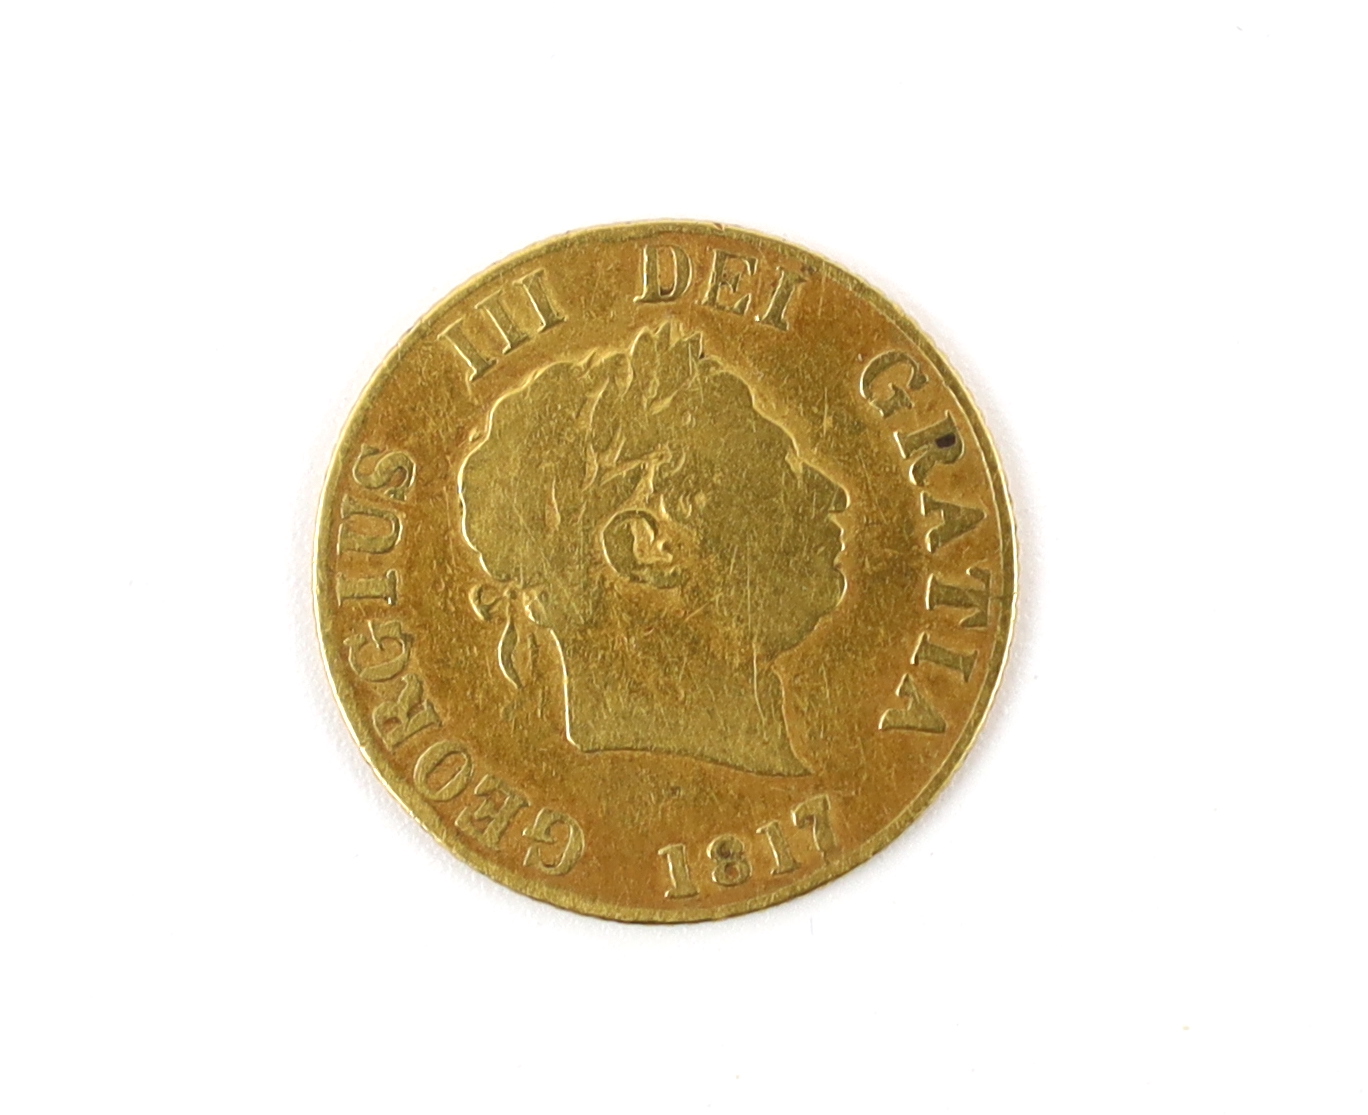 British Gold Coins, George III half sovereign, 1817, VG or better (S3786)